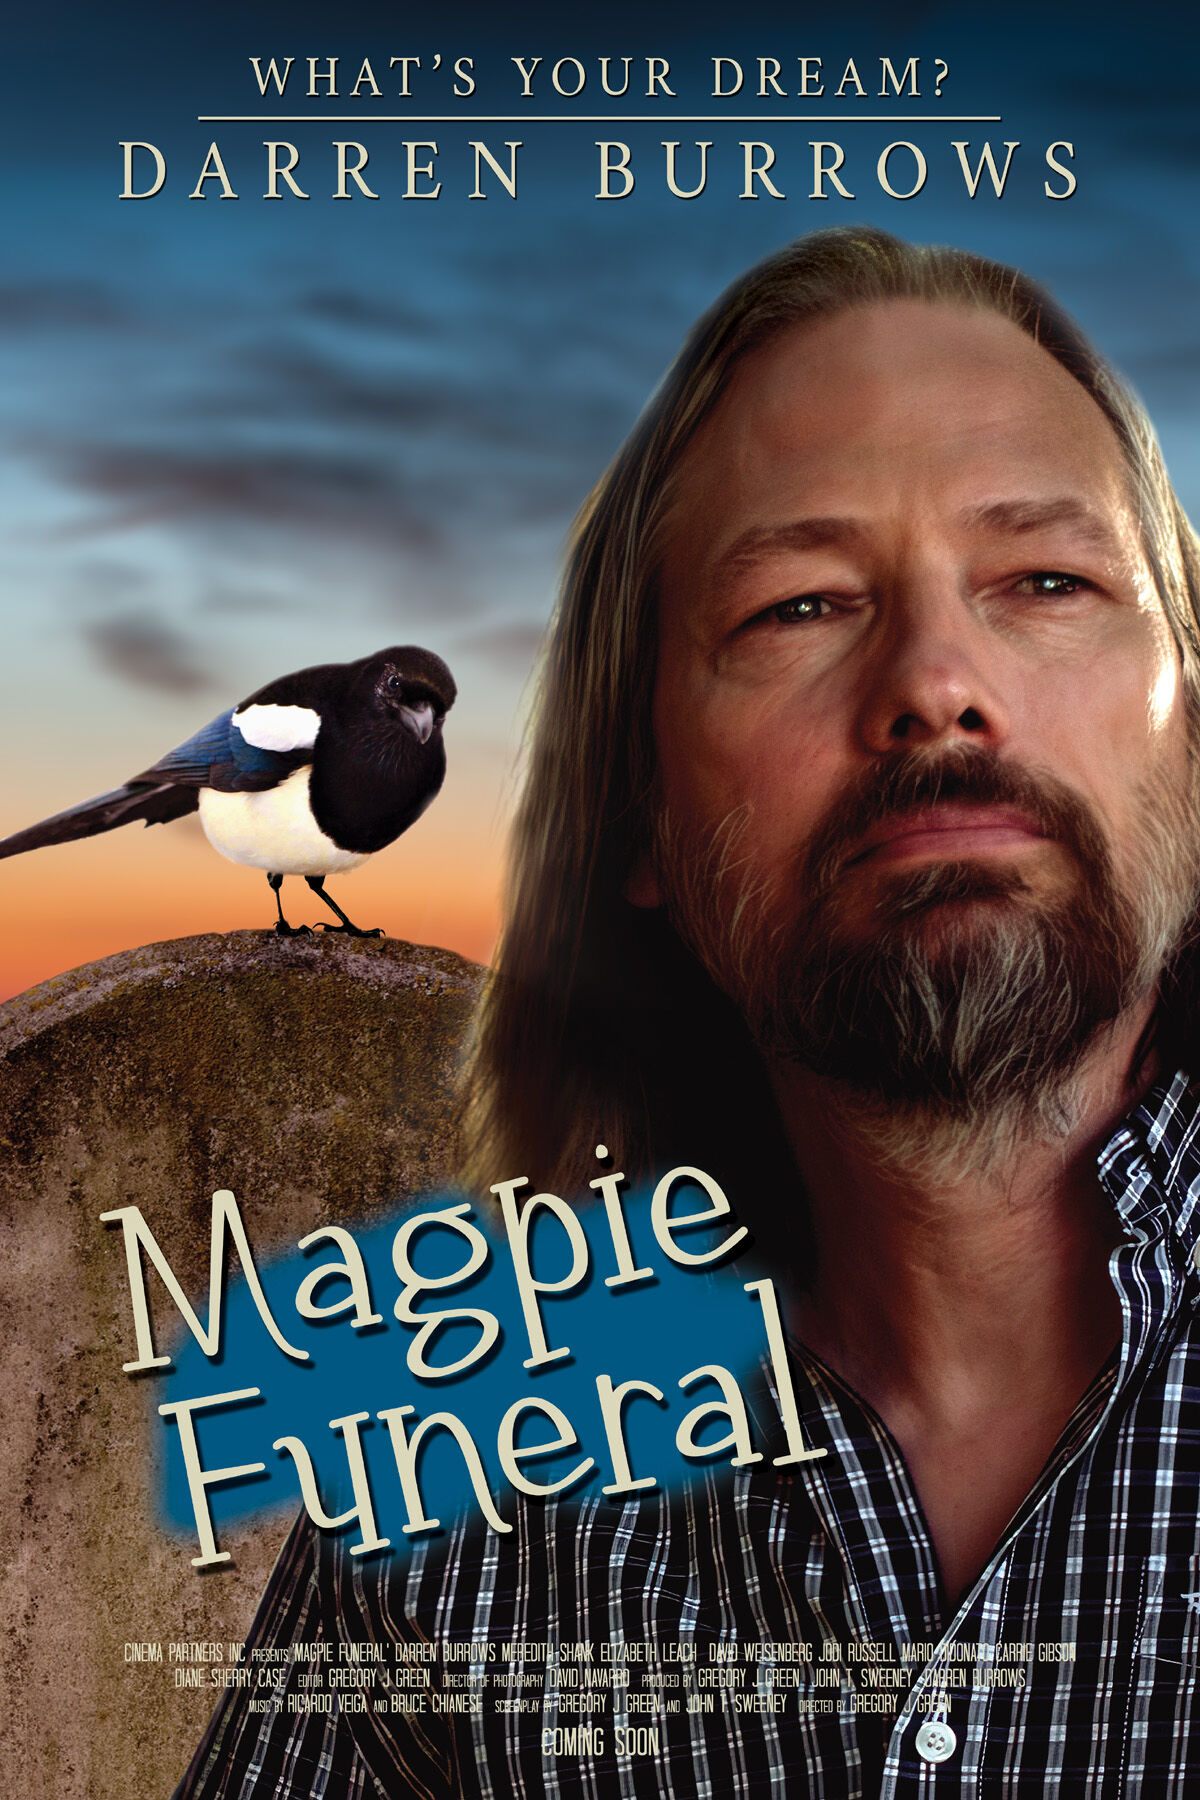 Magpie Funeral